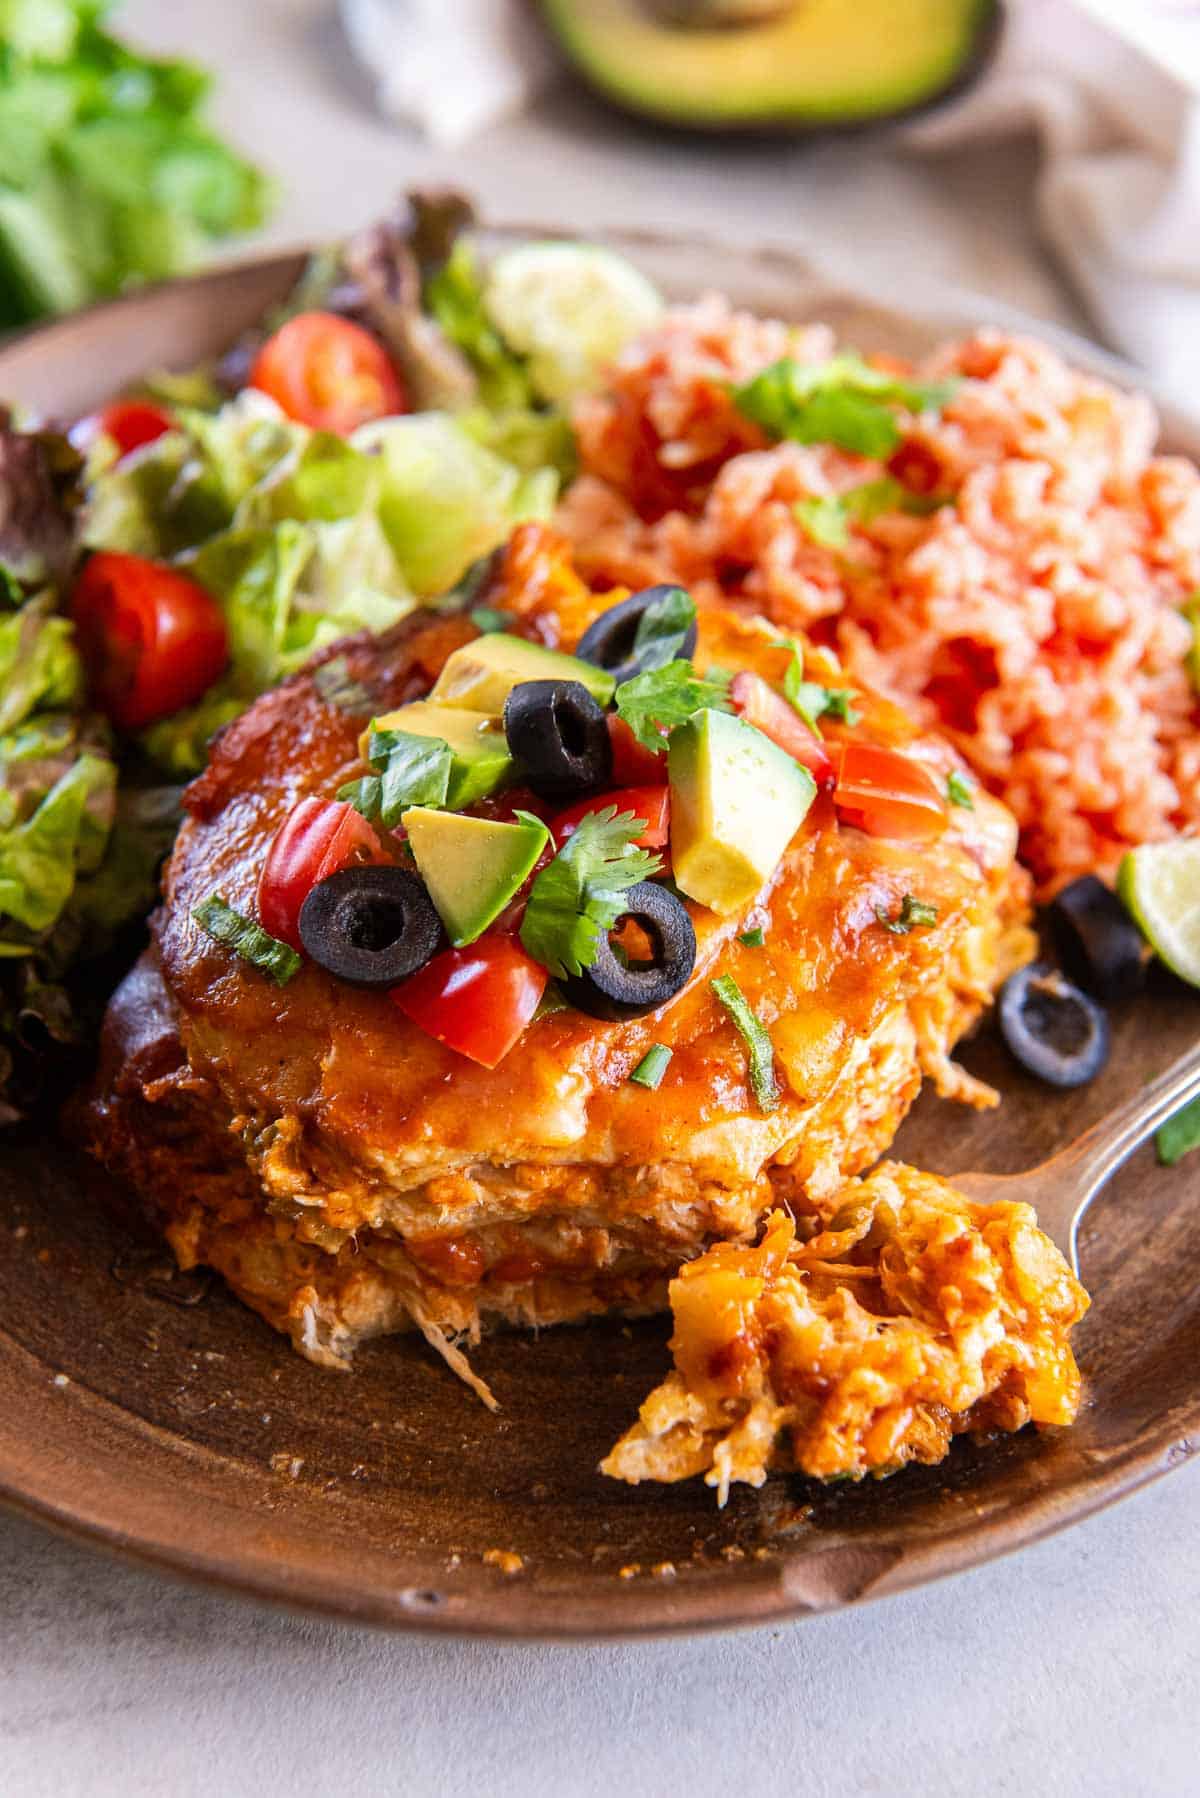 A fork resting on a plate with a serving of slow cooker chicken enchiladas, rice, and salad.